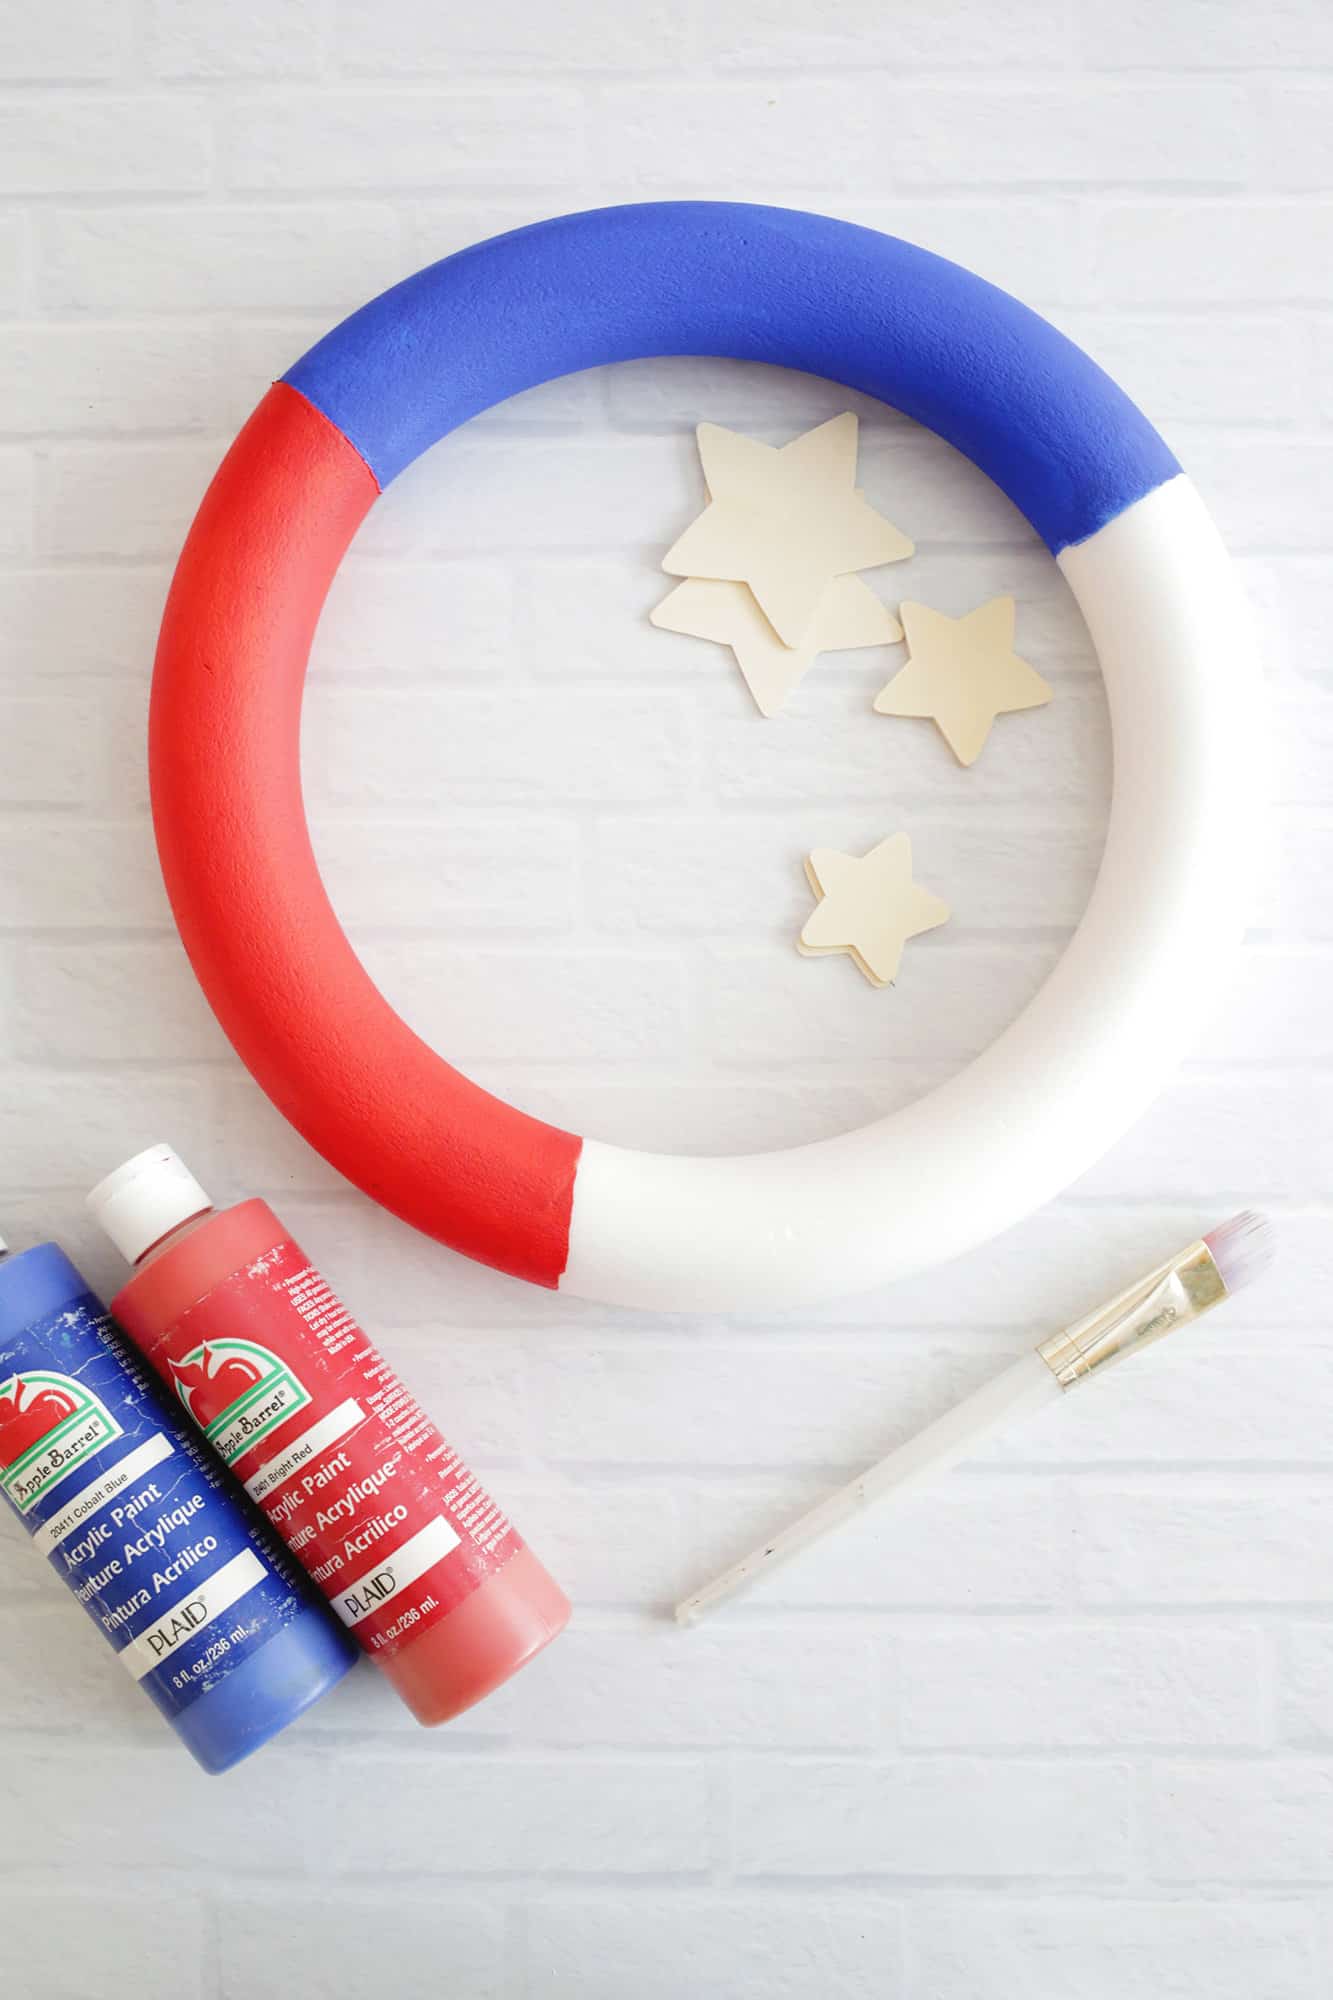 wreath frame is divided into red, white and blue sections